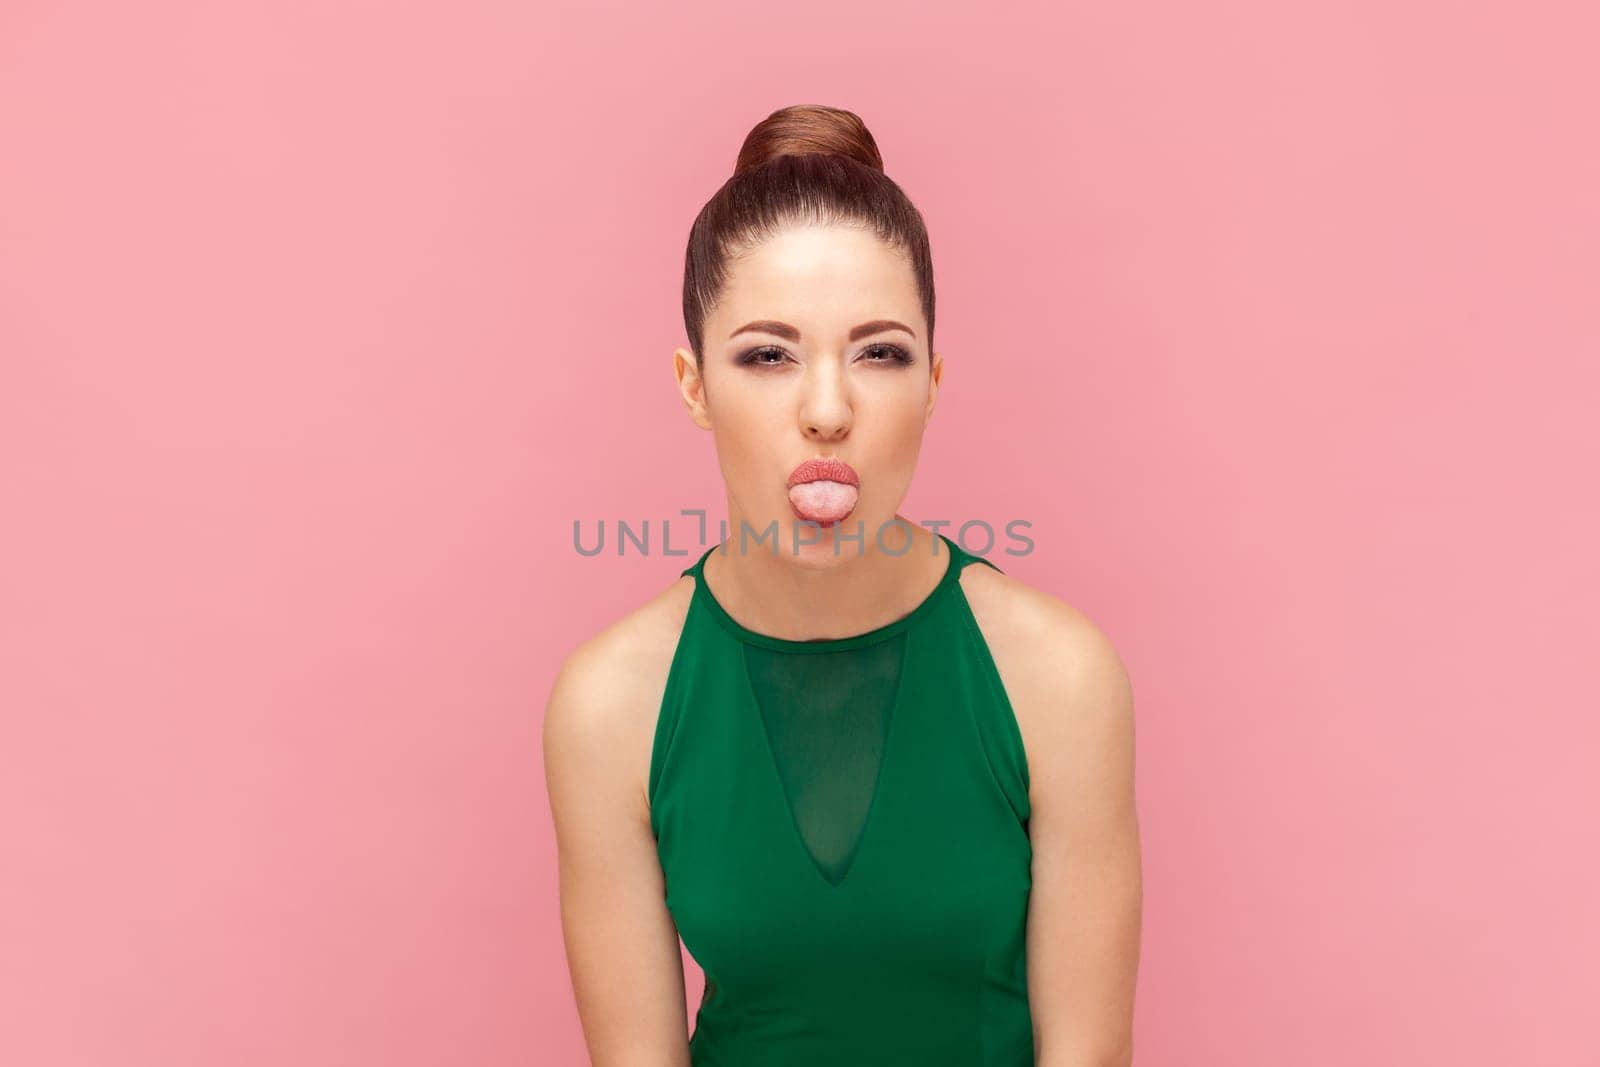 Portrait of funny attractive woman with bun hairstyle, showing tongue out, demonstrating childish behavior, wearing green dress. Indoor studio shot isolated on pink background.